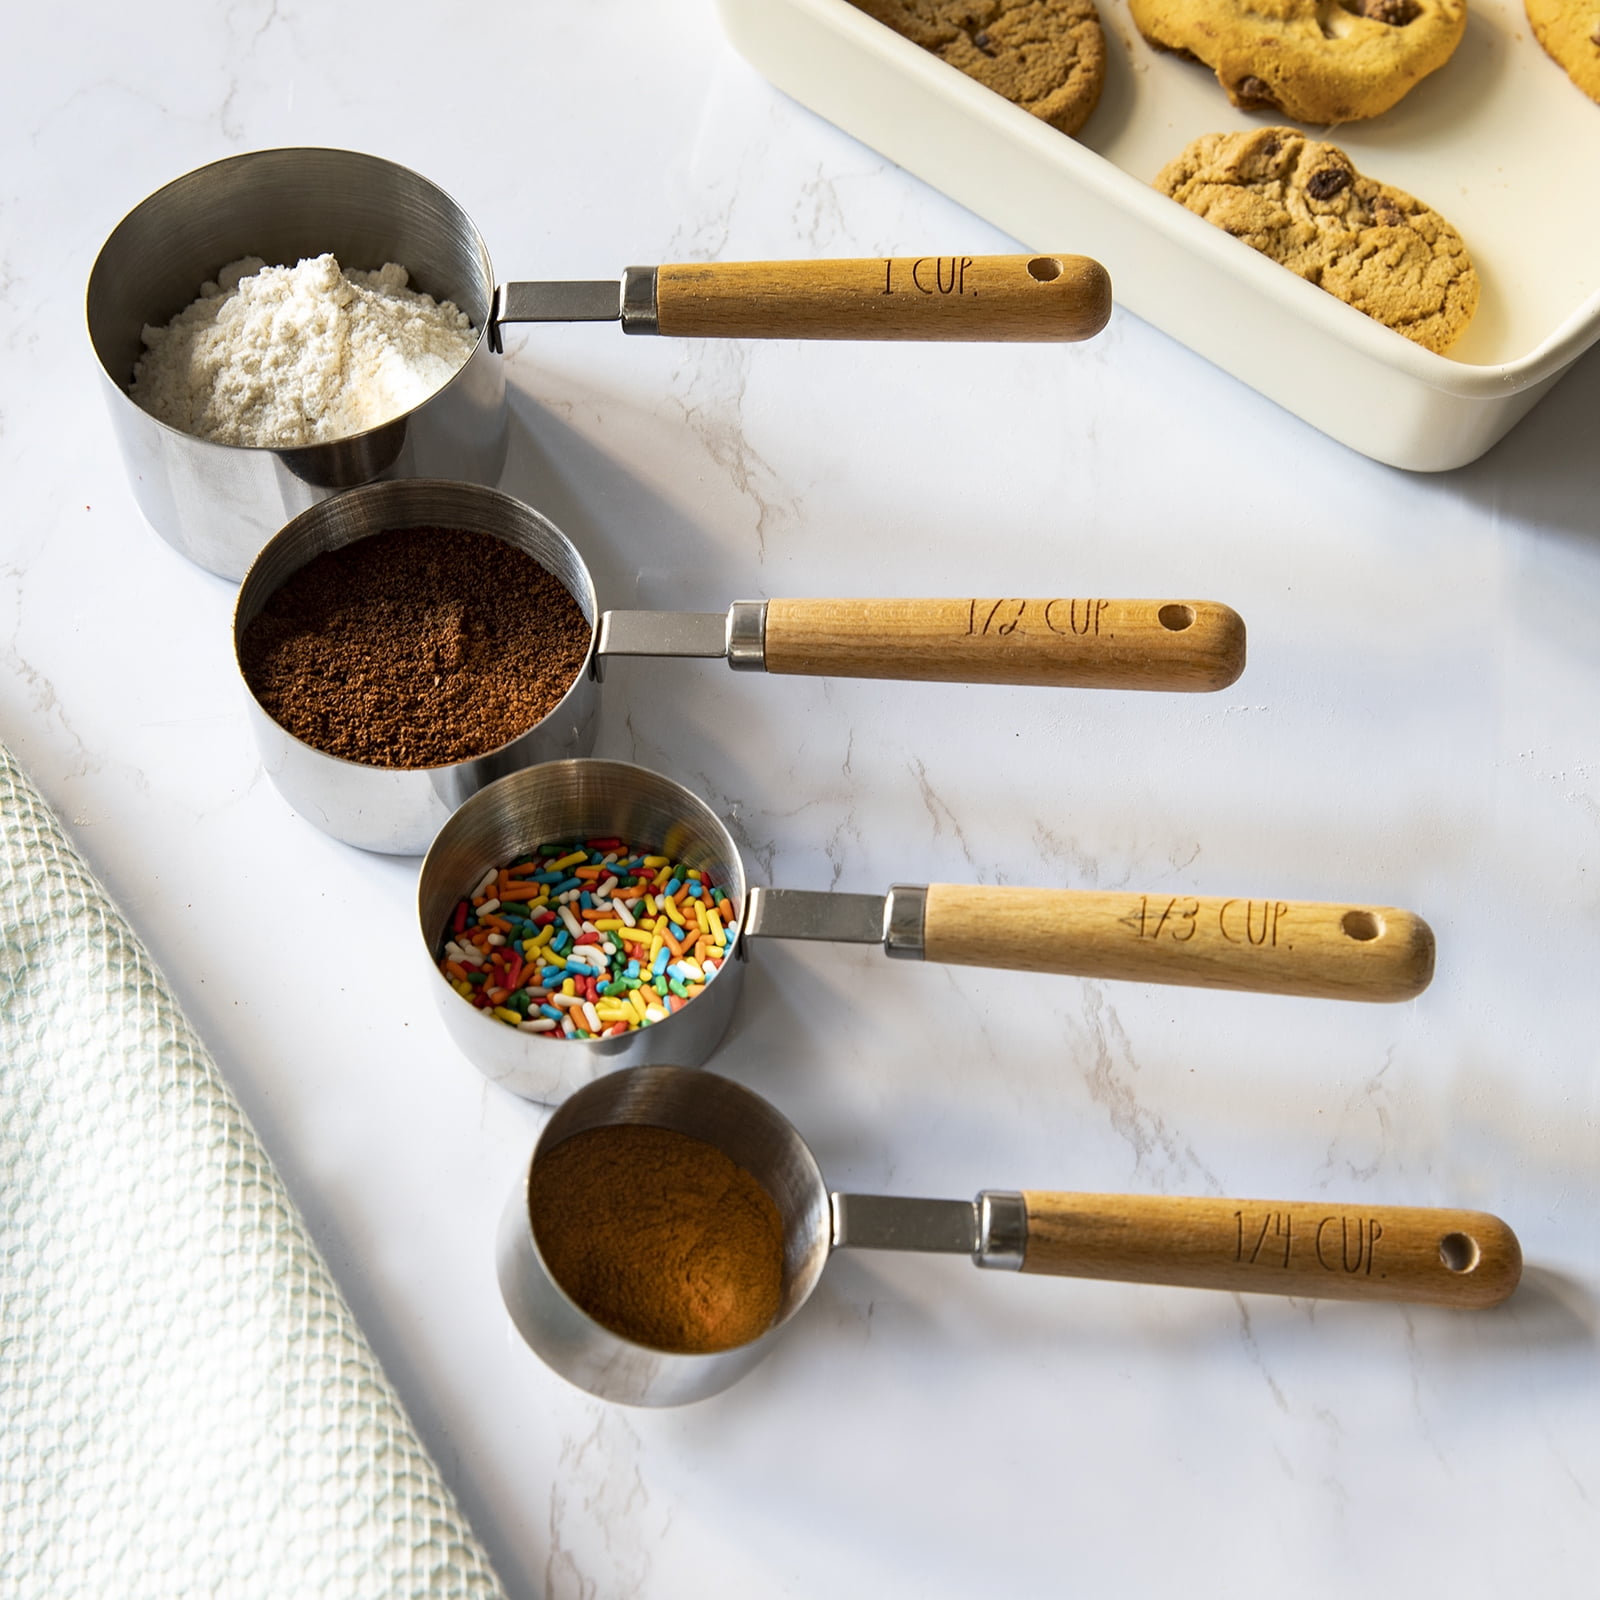 3x Rae Dunn Measuring Cups Bundle Deal - 3 Different Measuring Cup